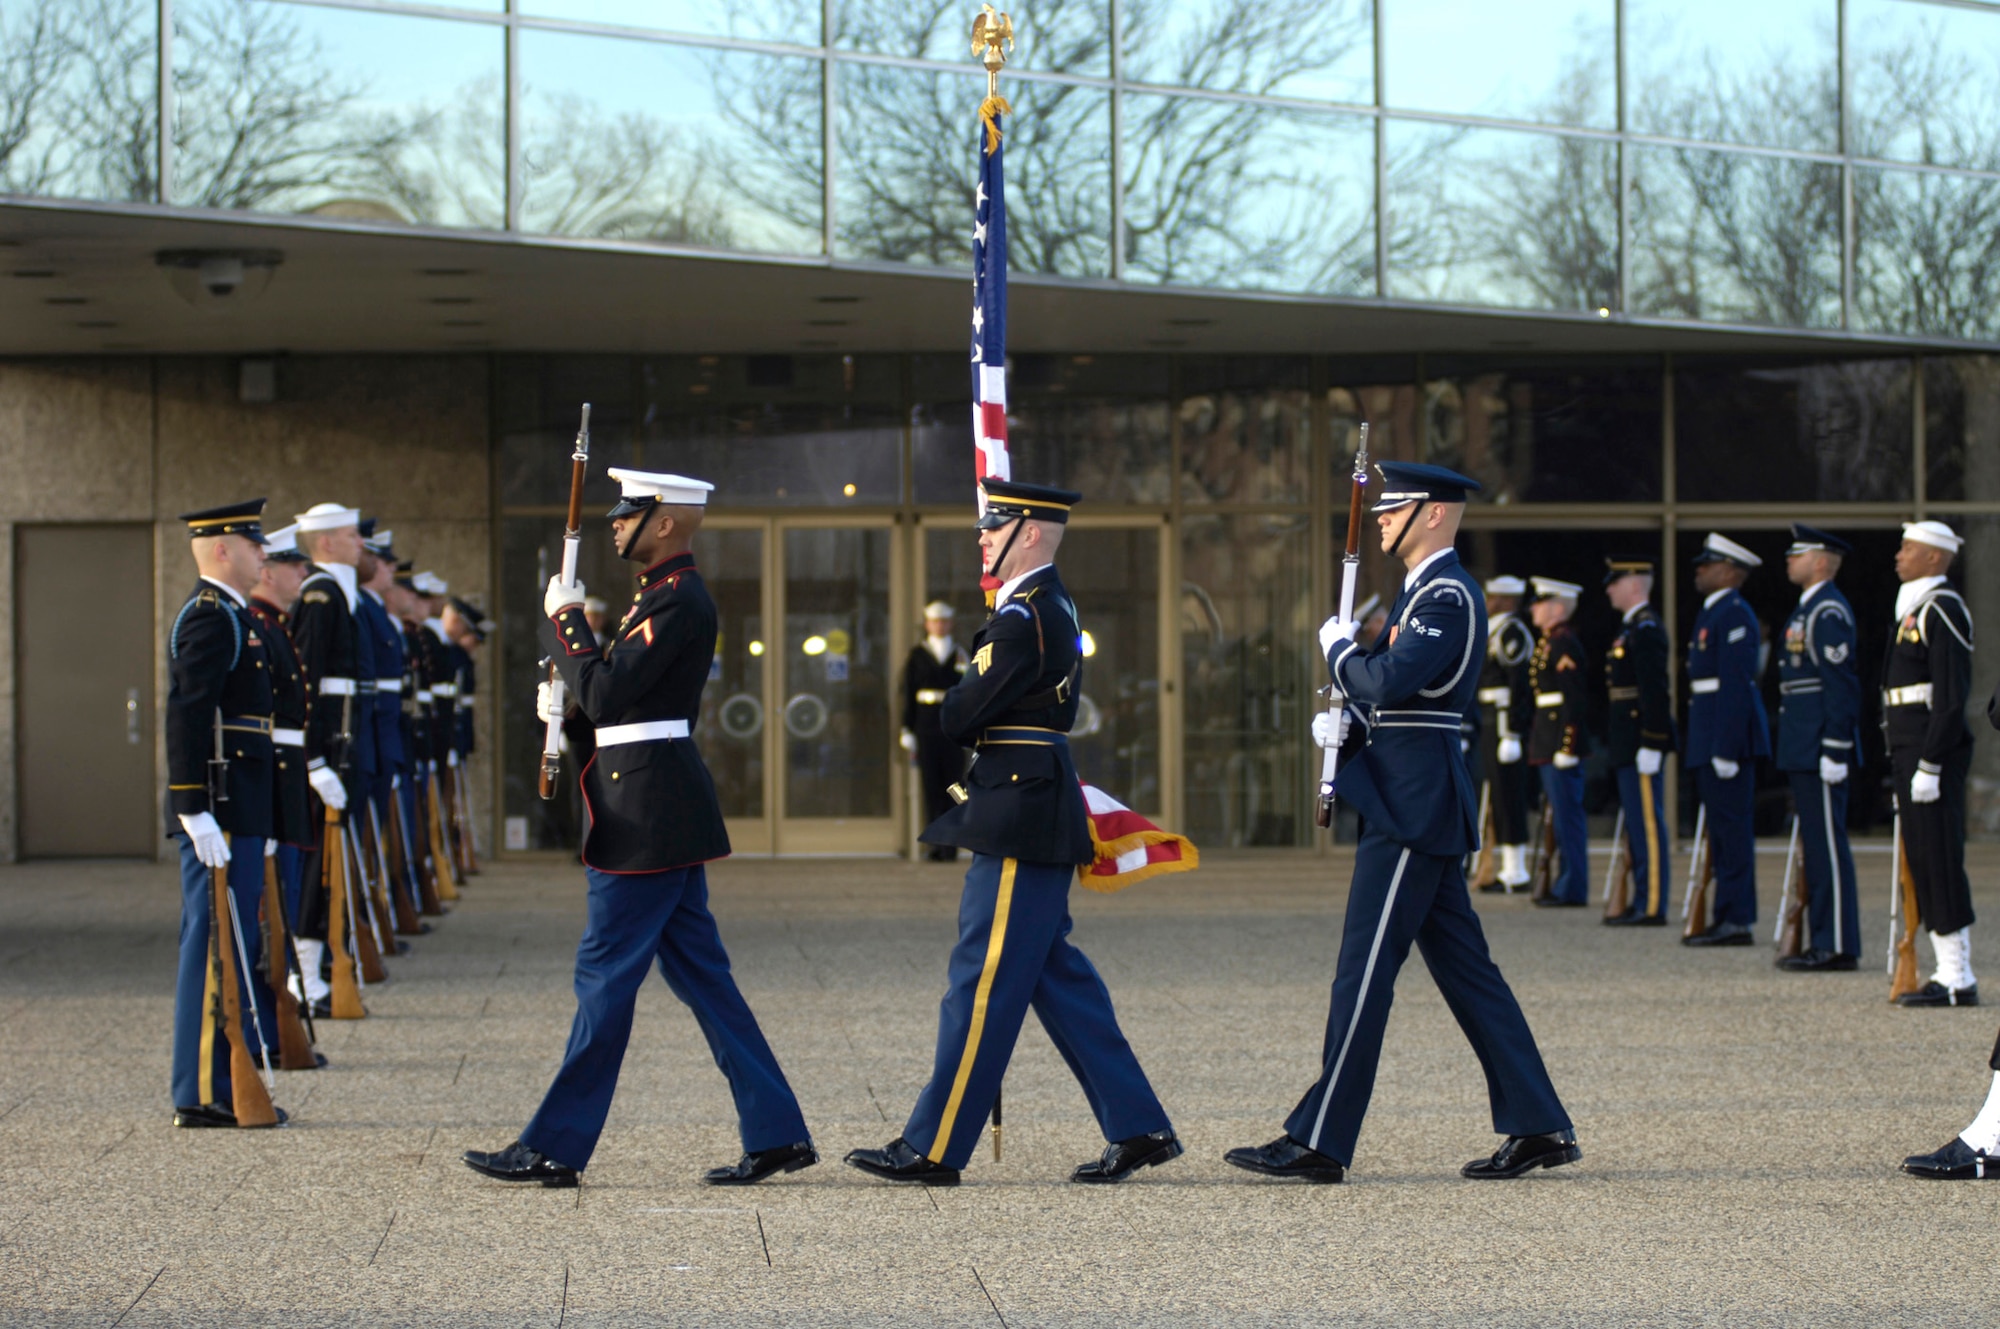 The Armed Forces Honor Guard prepares for the arrival of President Gerald R. Ford's body in front of the the Gerald R. Ford Presidential Library and Museum Jan. 2 in Grand Rapids, Mich. (U.S. Air Force photo/Tech. Sgt. Cecilio M. Ricardo Jr.)